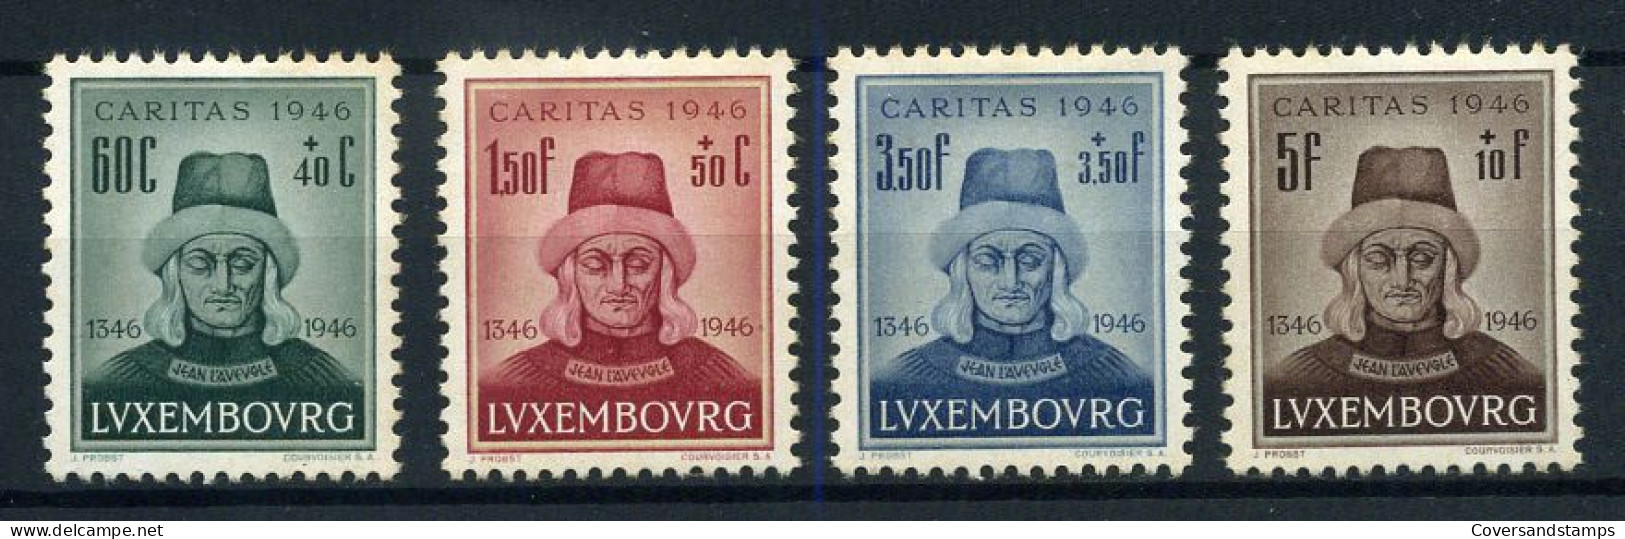 Luxembourg - 388/91 - Caritas 1946 - MH * - Neufs